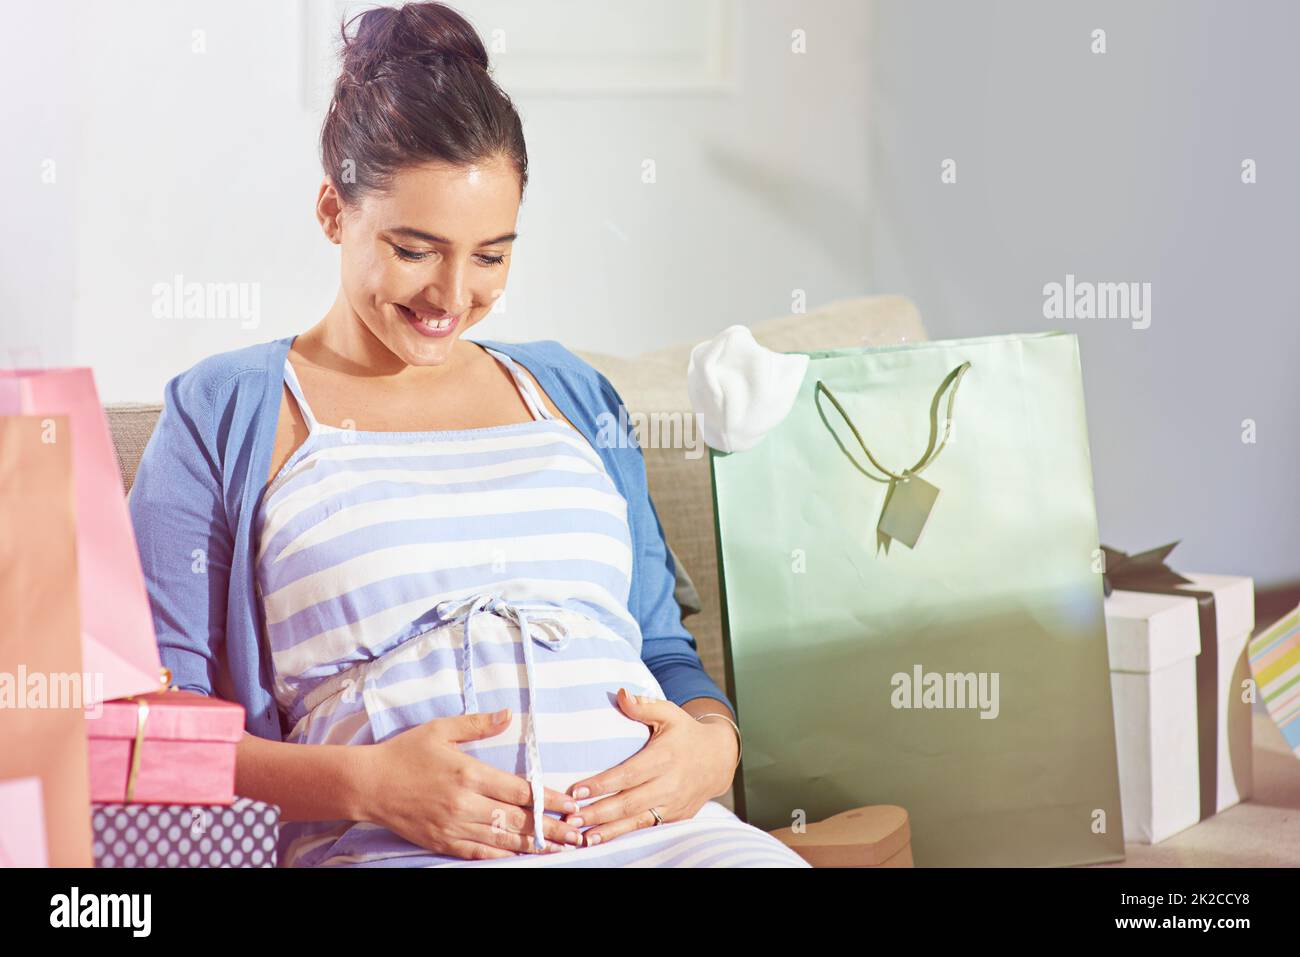 Her baby is also enjoying the celebrations. Shot of a young pregnant woman at her baby shower. Stock Photo